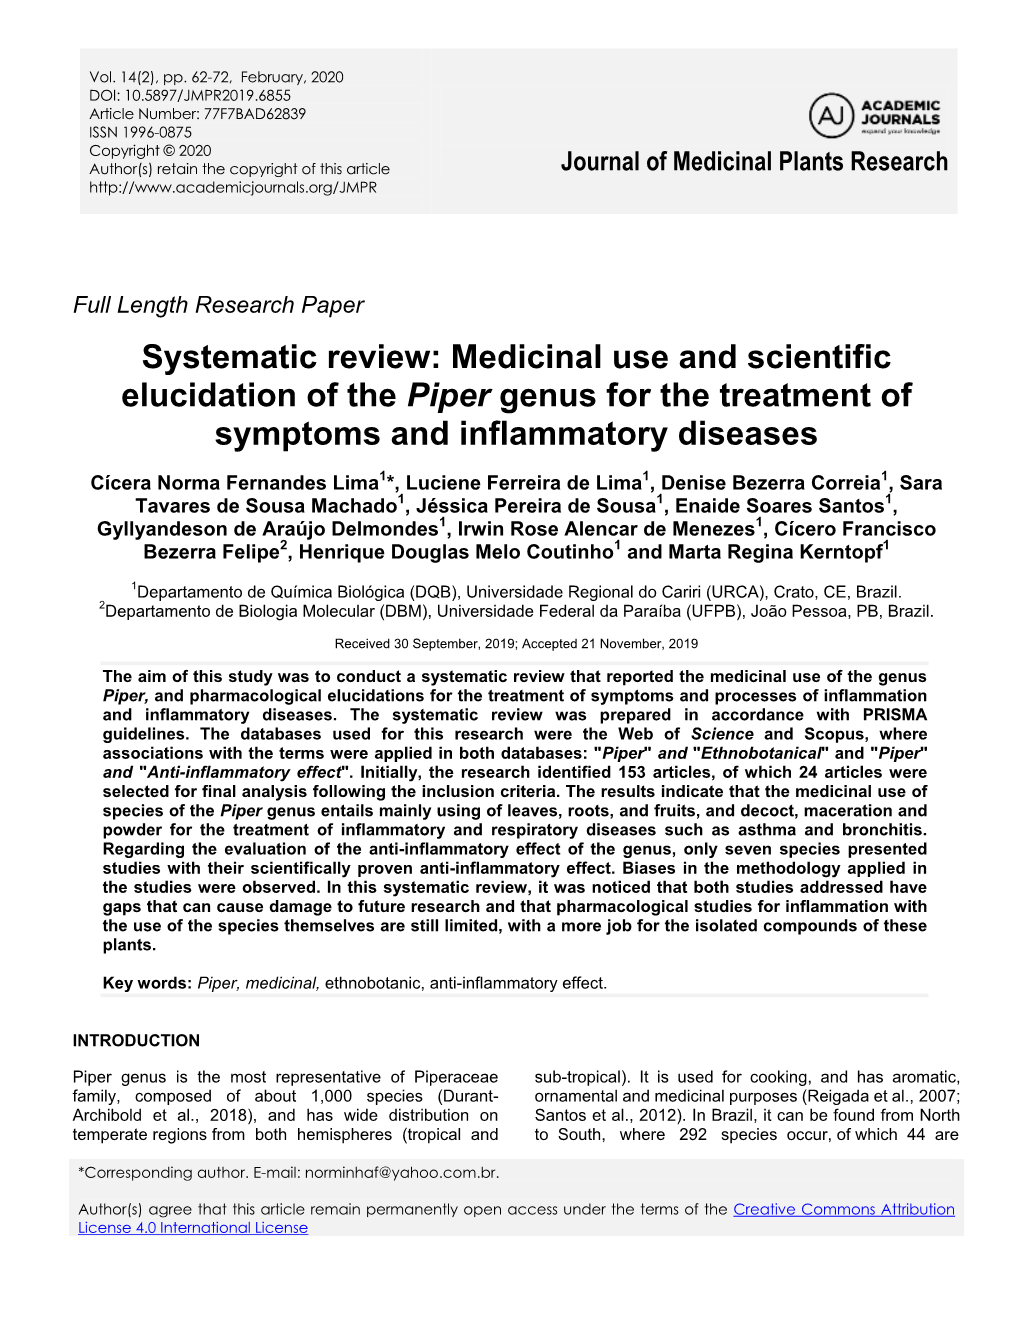 Systematic Review: Medicinal Use and Scientific Elucidation of the Piper Genus for the Treatment of Symptoms and Inflammatory Diseases